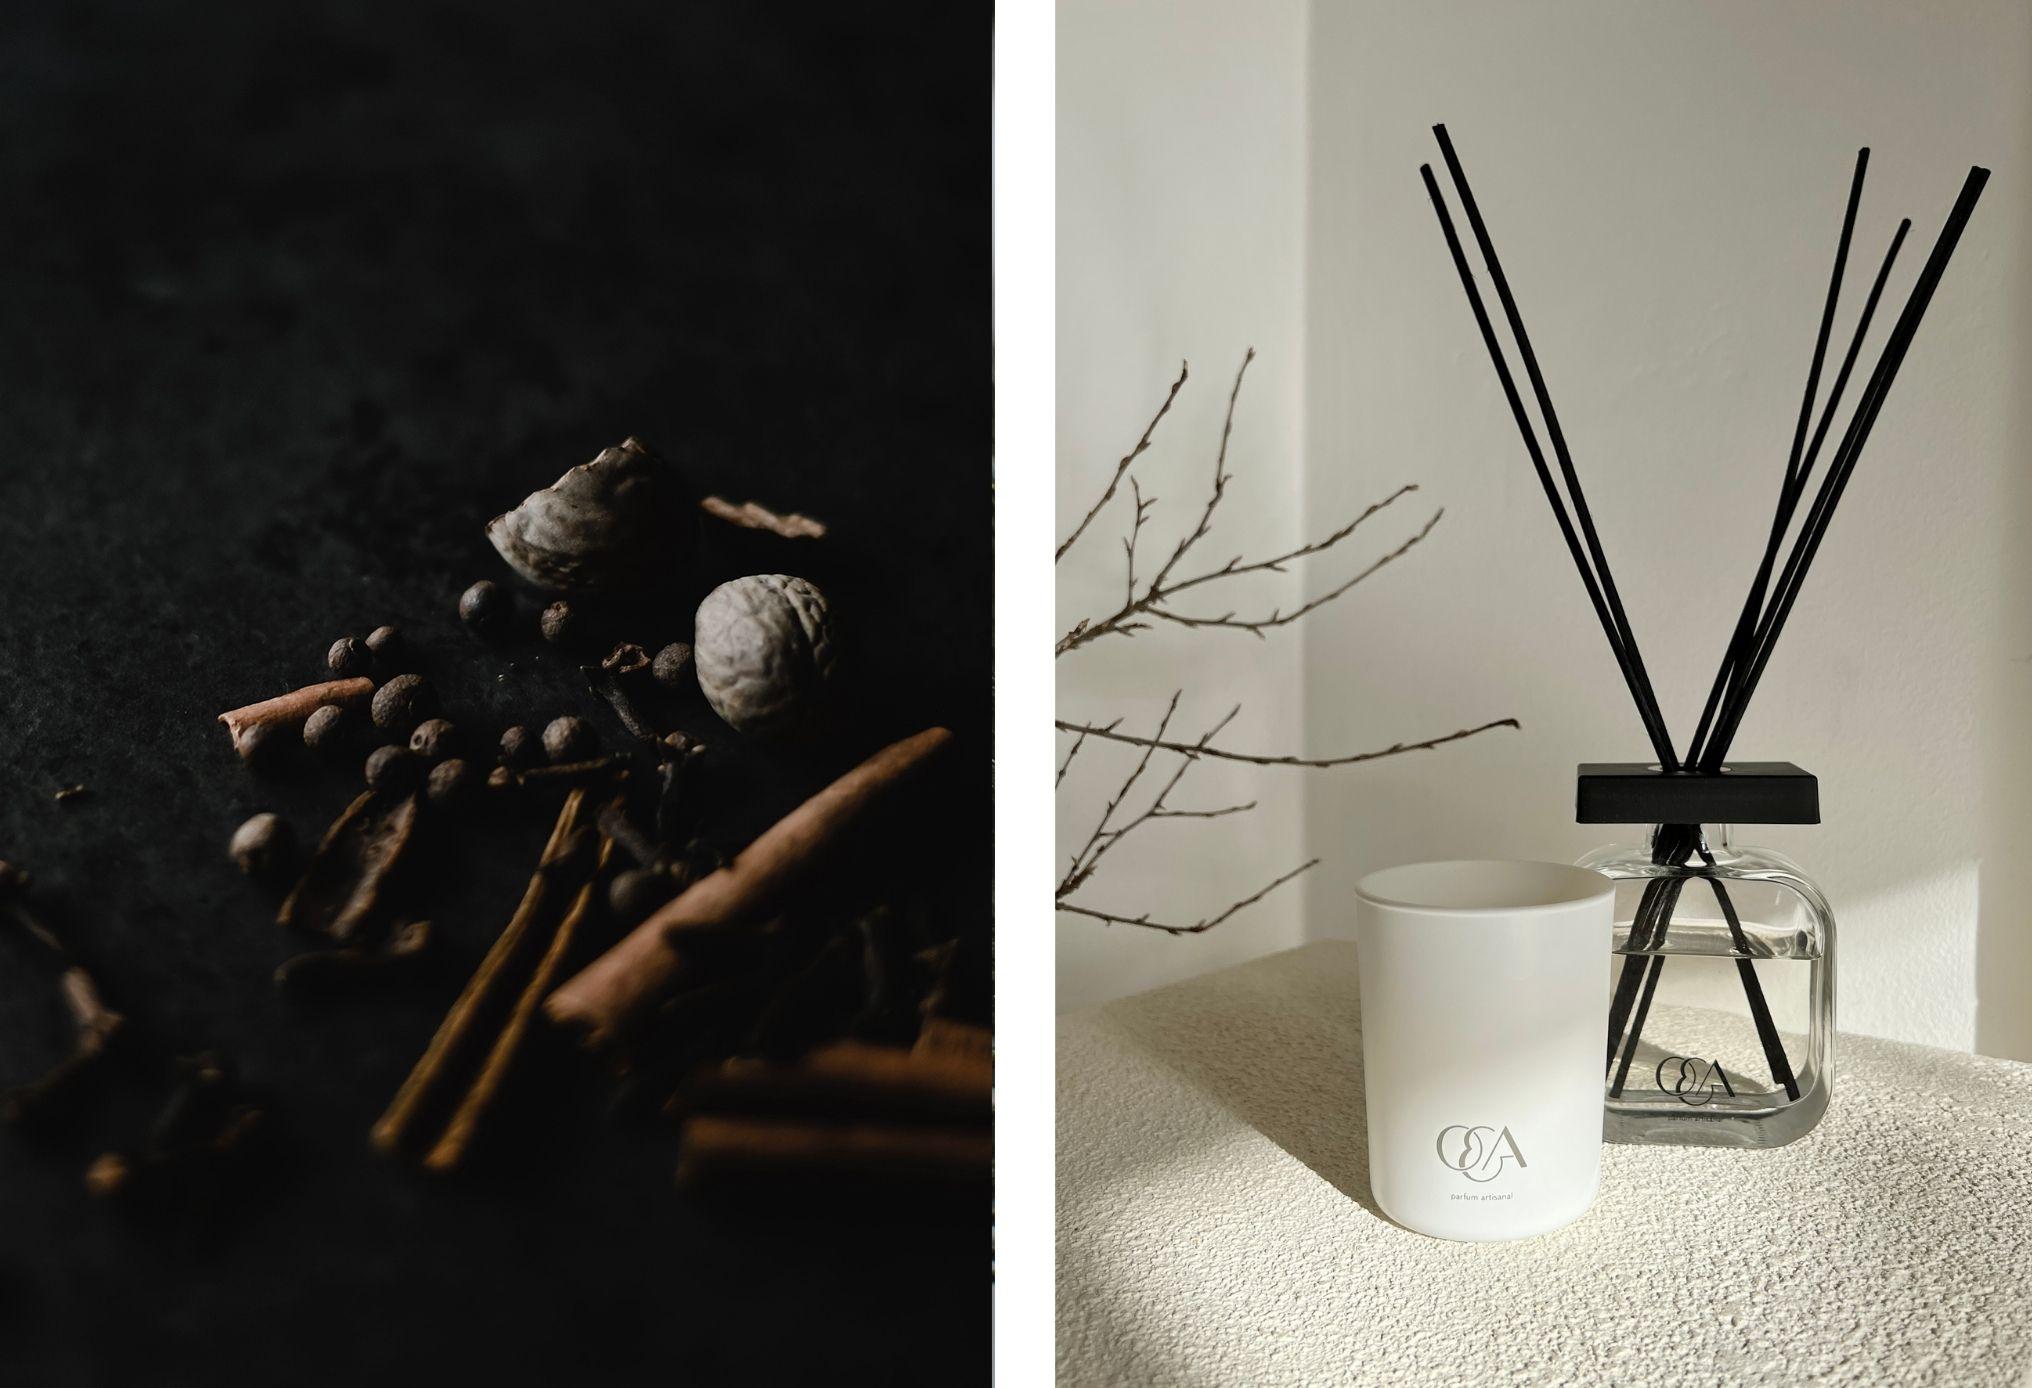 O&A London creates sophisticated scents for your home together with the best perfume houses in Grasse. Individually designed home diffusers will add an indelible impression of your home, literally in the air itself.

Top notes: aromatic notes,